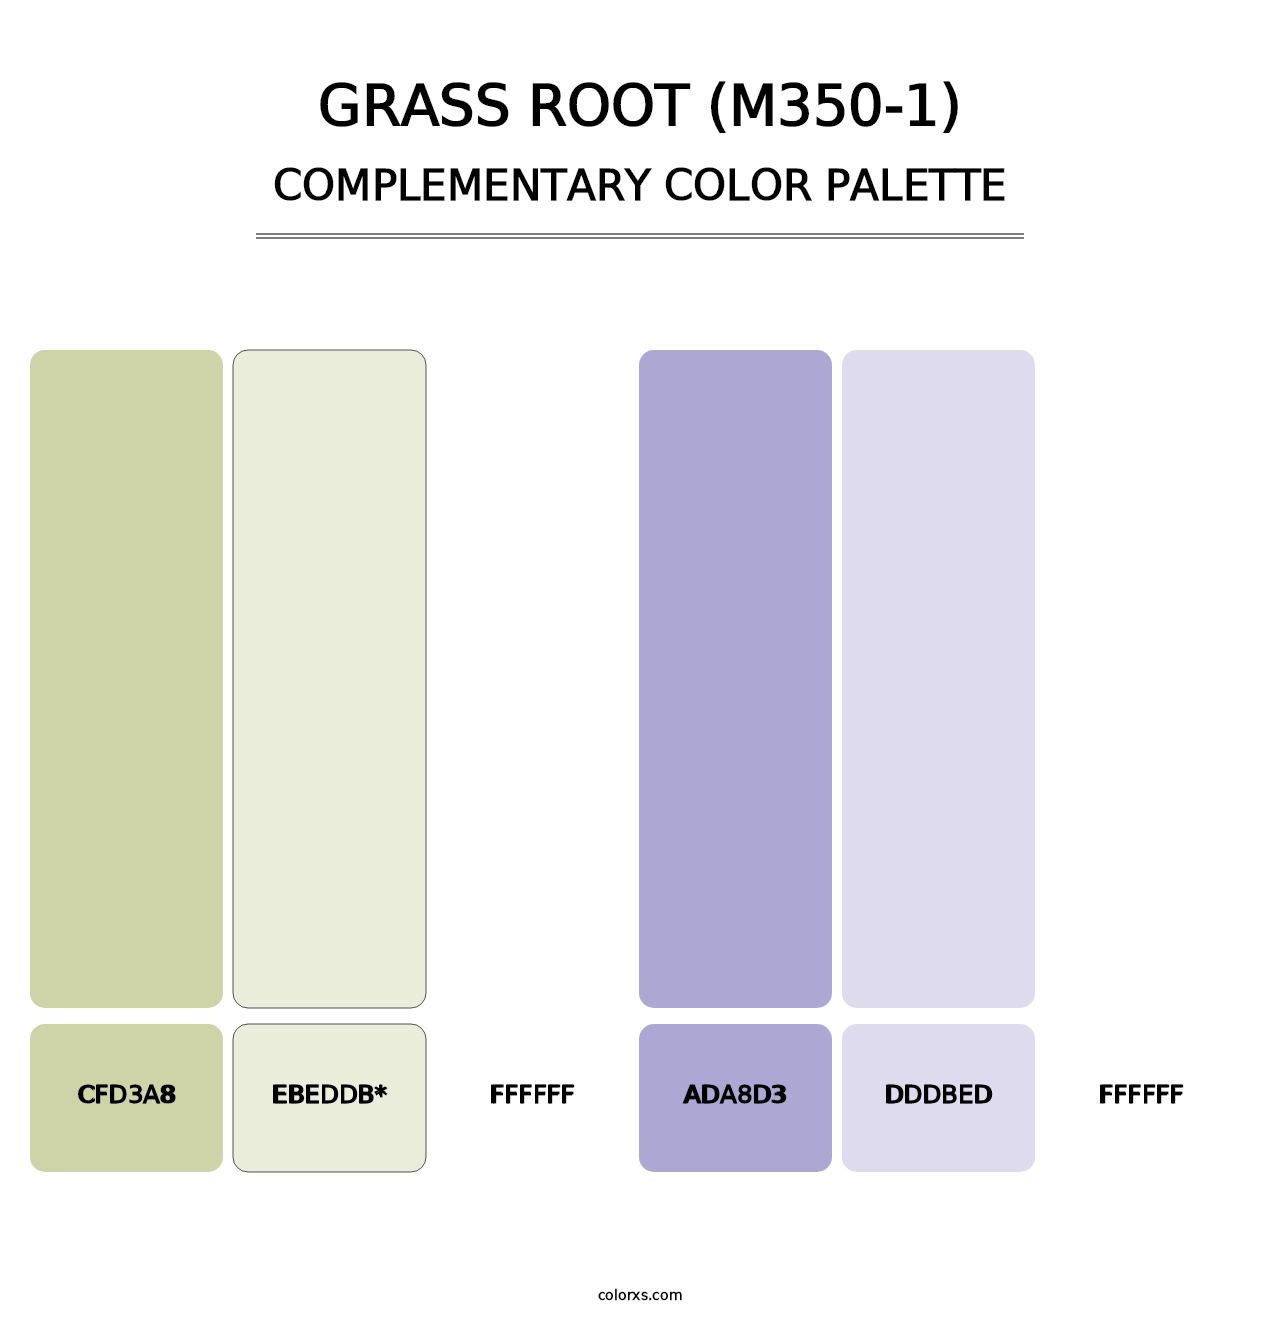 Grass Root (M350-1) - Complementary Color Palette